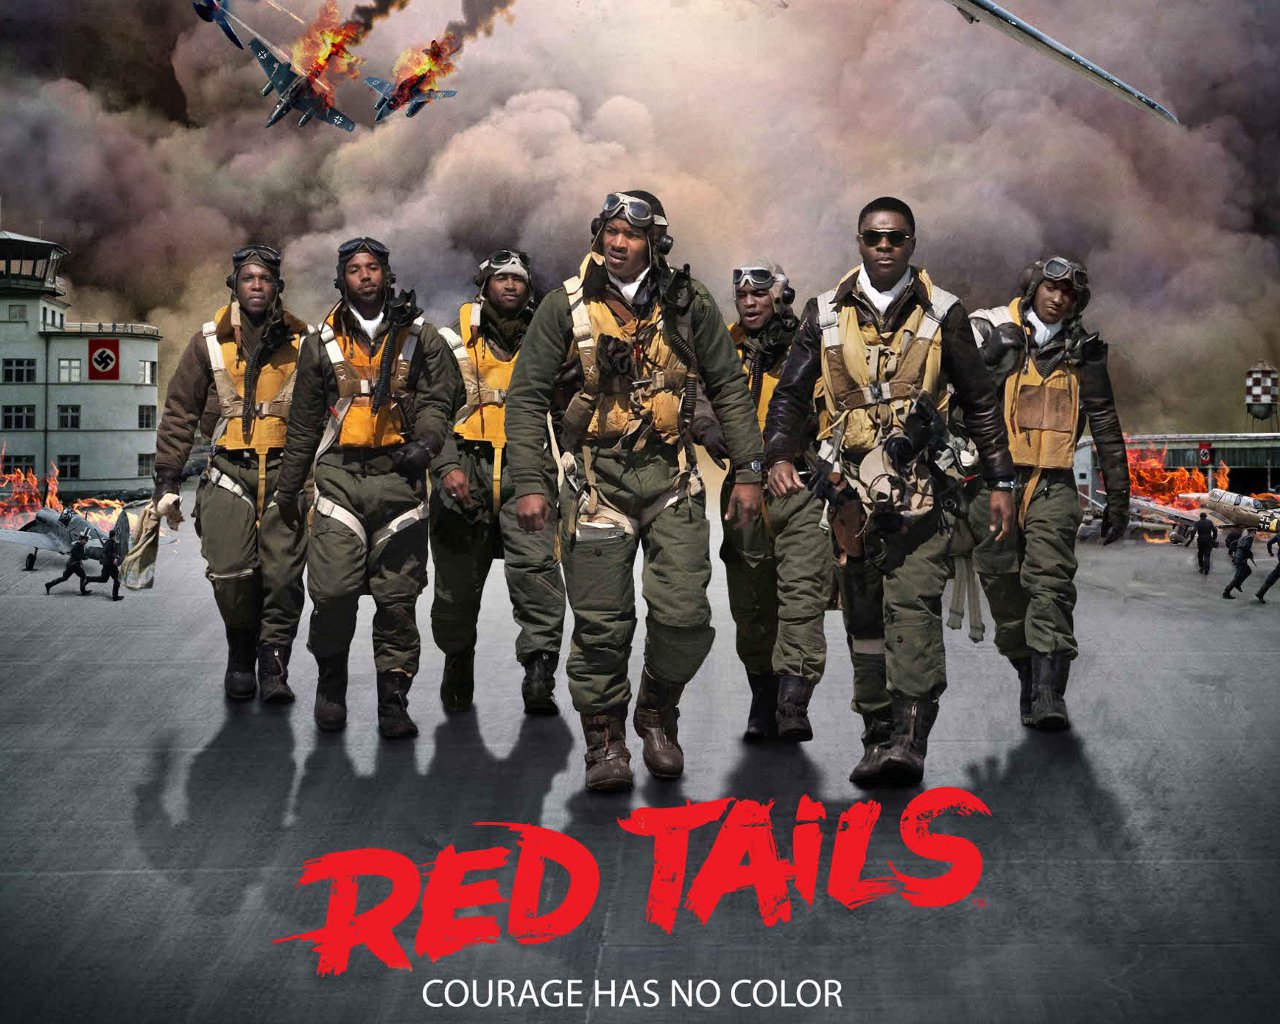 ... wallpapers | Hollywood movies wallpapers: Red Tails hd wallpapers